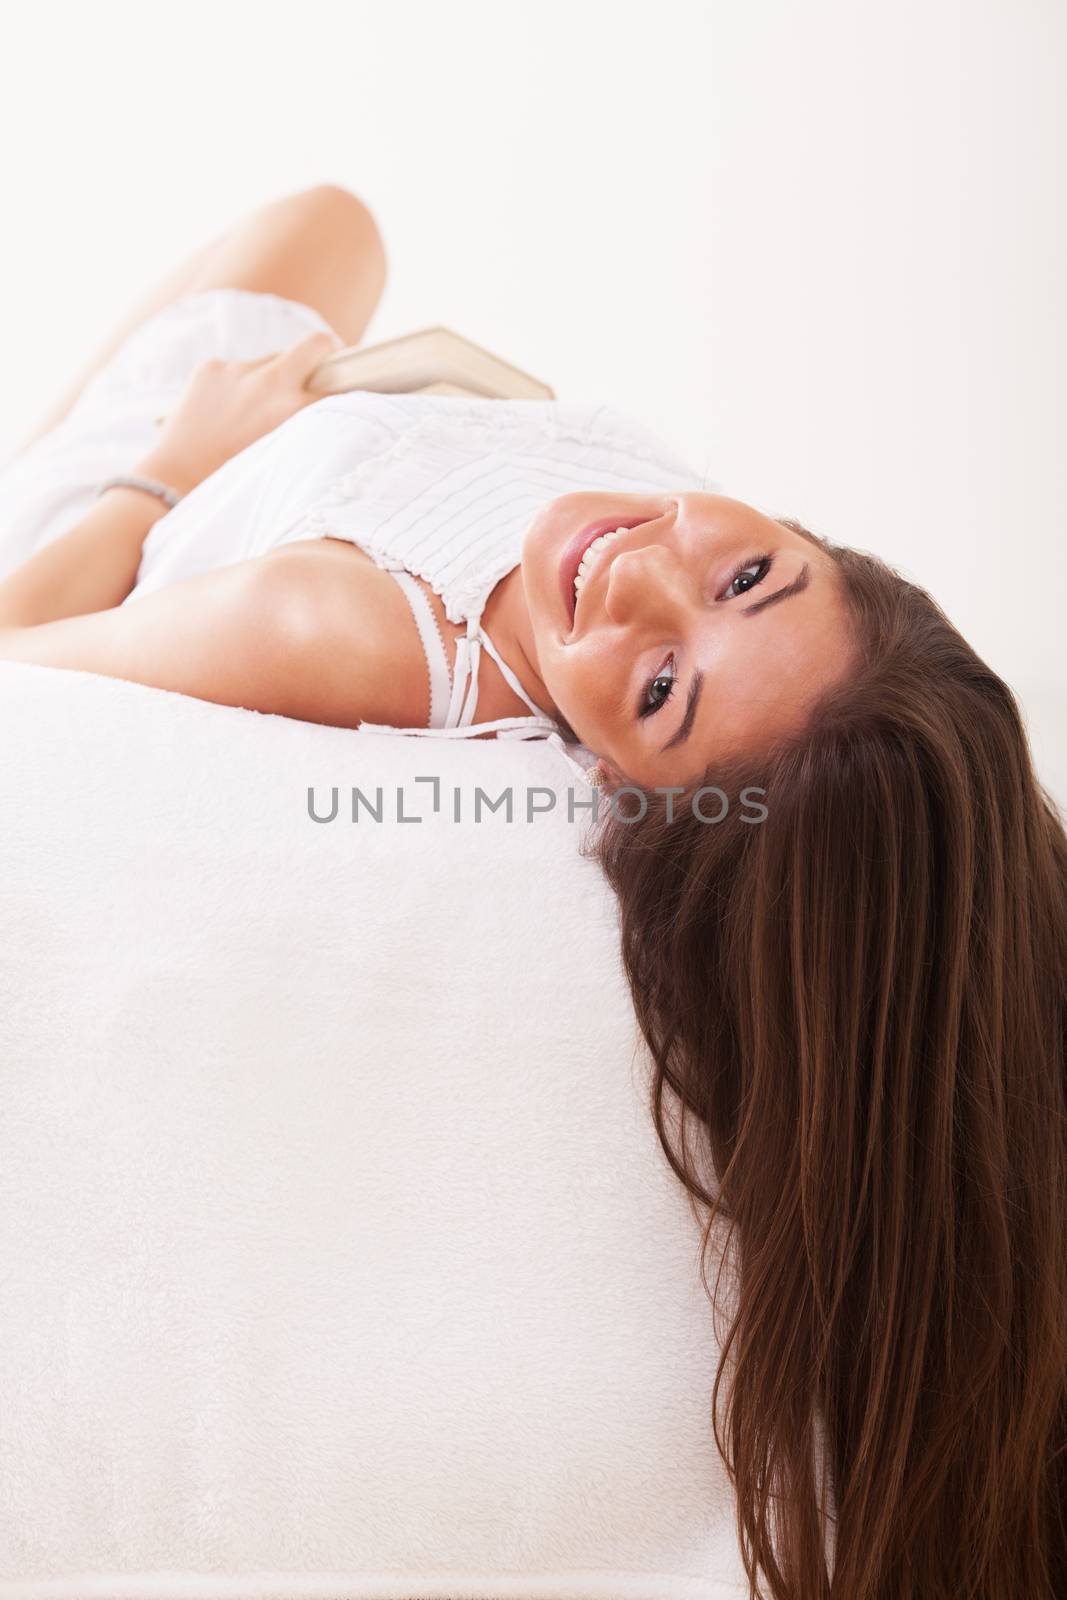 Teenage Girl On Bed by MilanMarkovic78